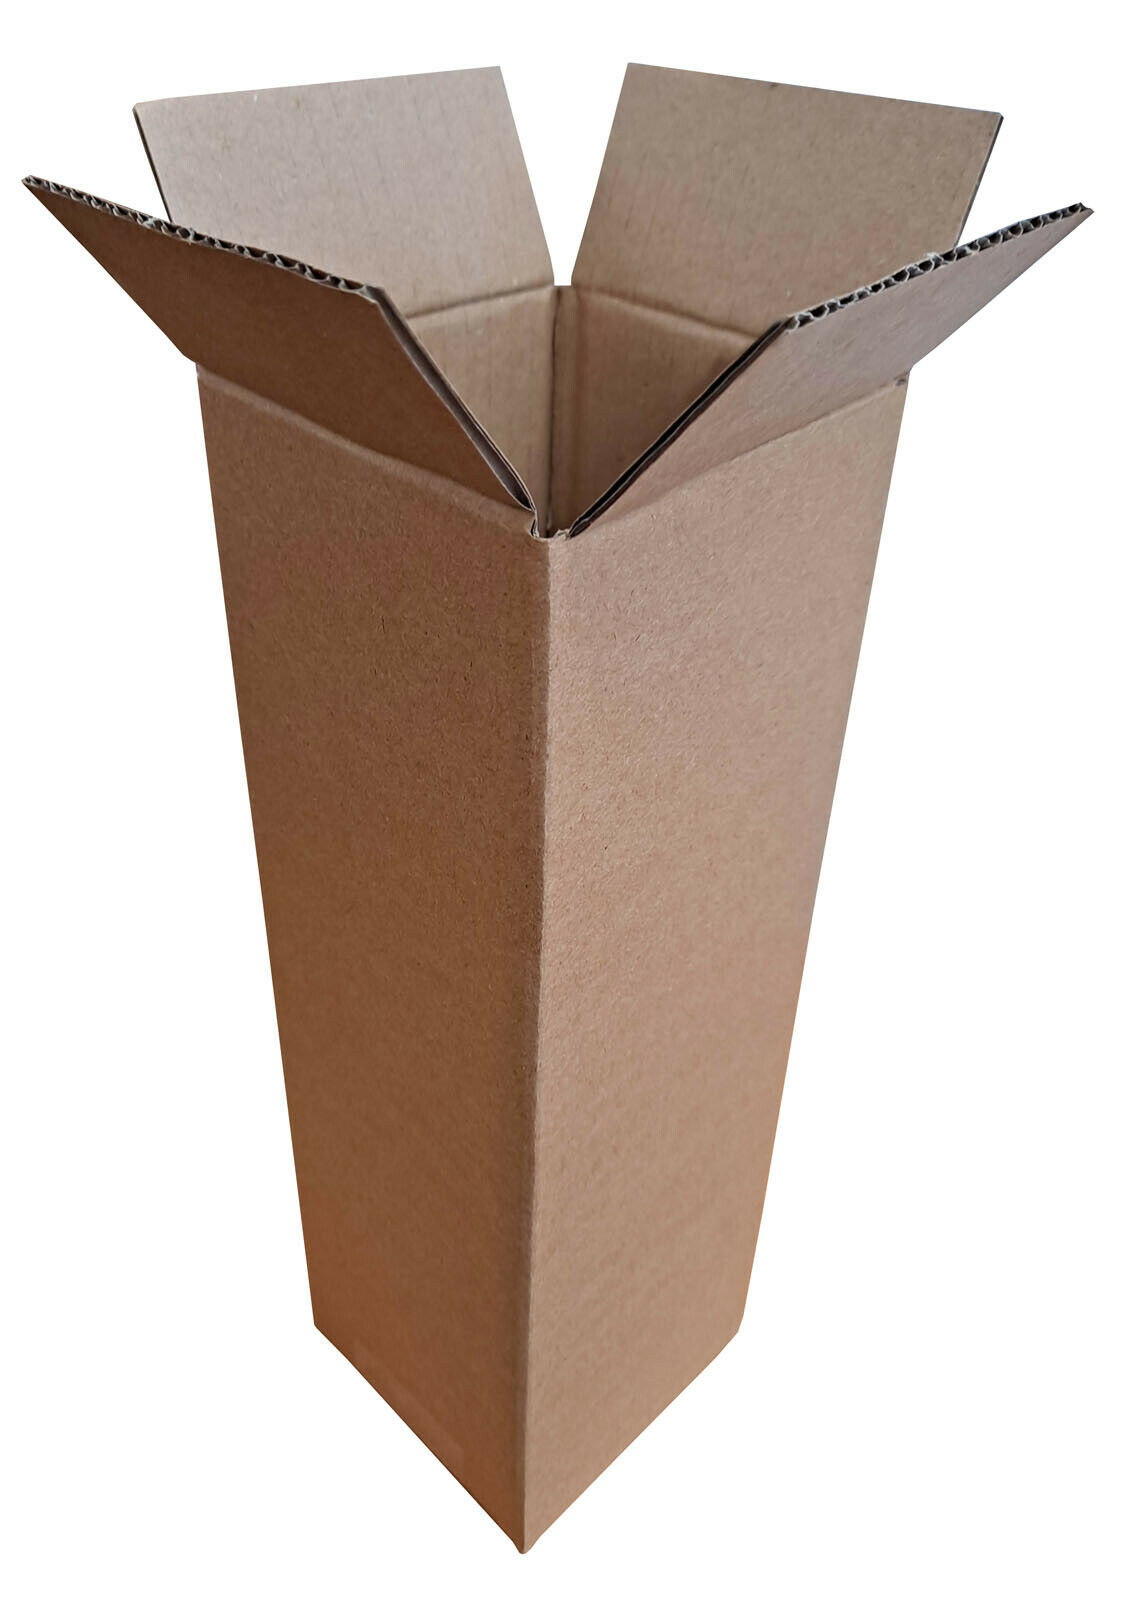 290mm x 90mm x 90mm Small Parcel Cardboard Boxes for 600ml Bottles